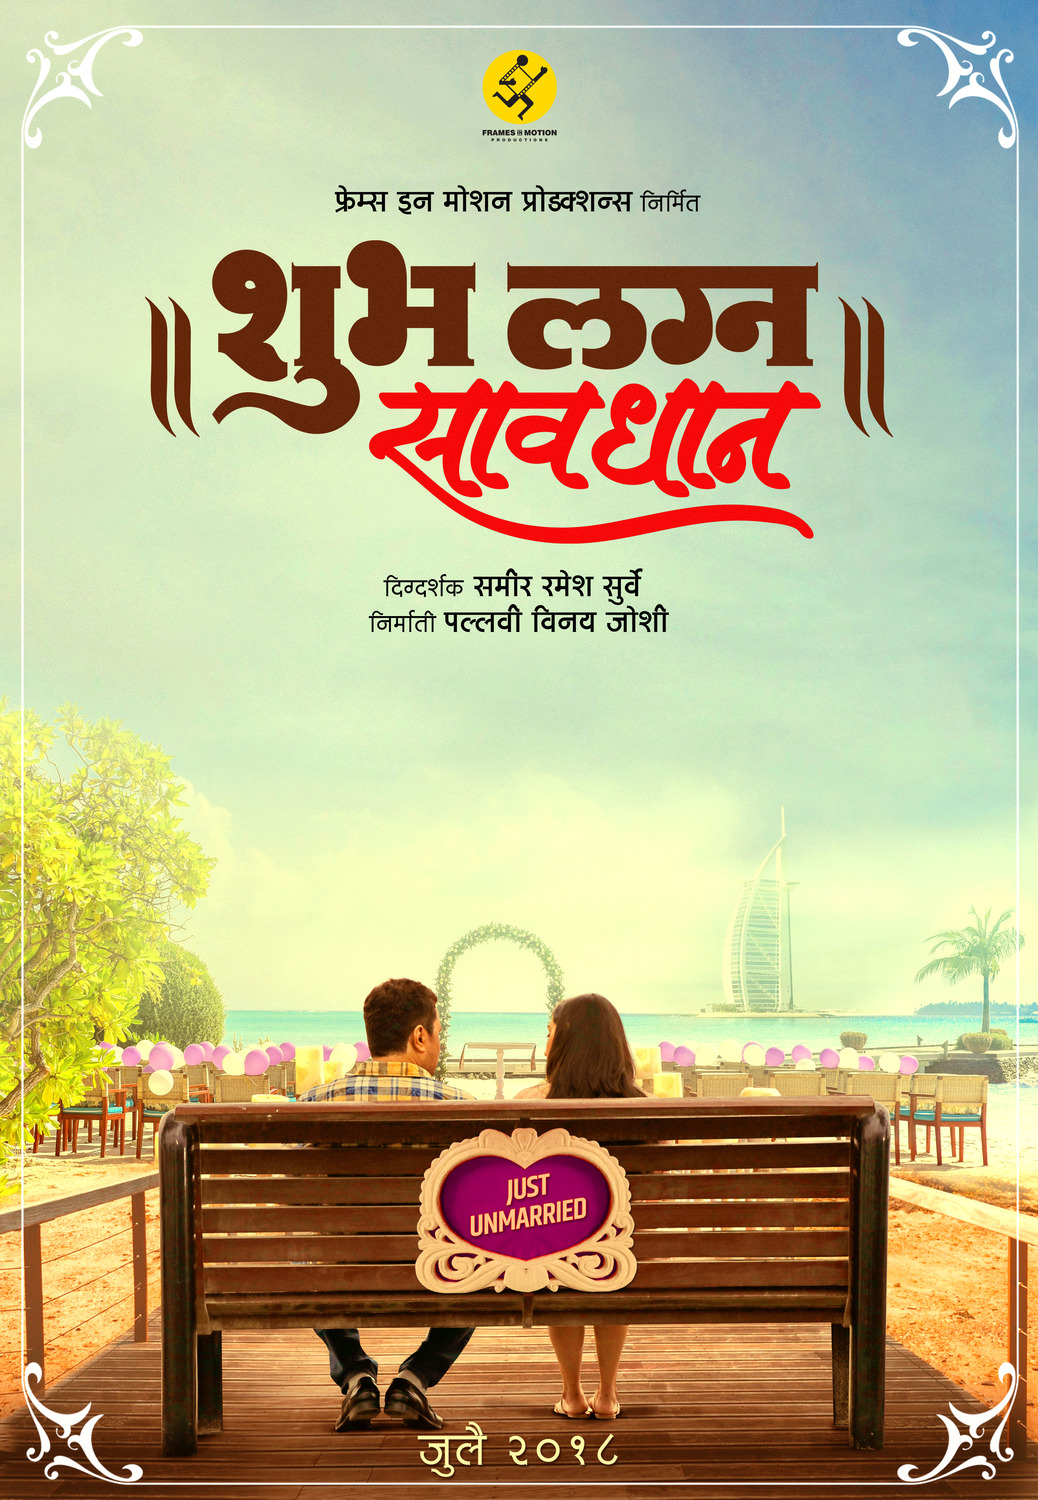 Extra Large Movie Poster Image for Shubh Mangal Saavdhan (#5 of 5)